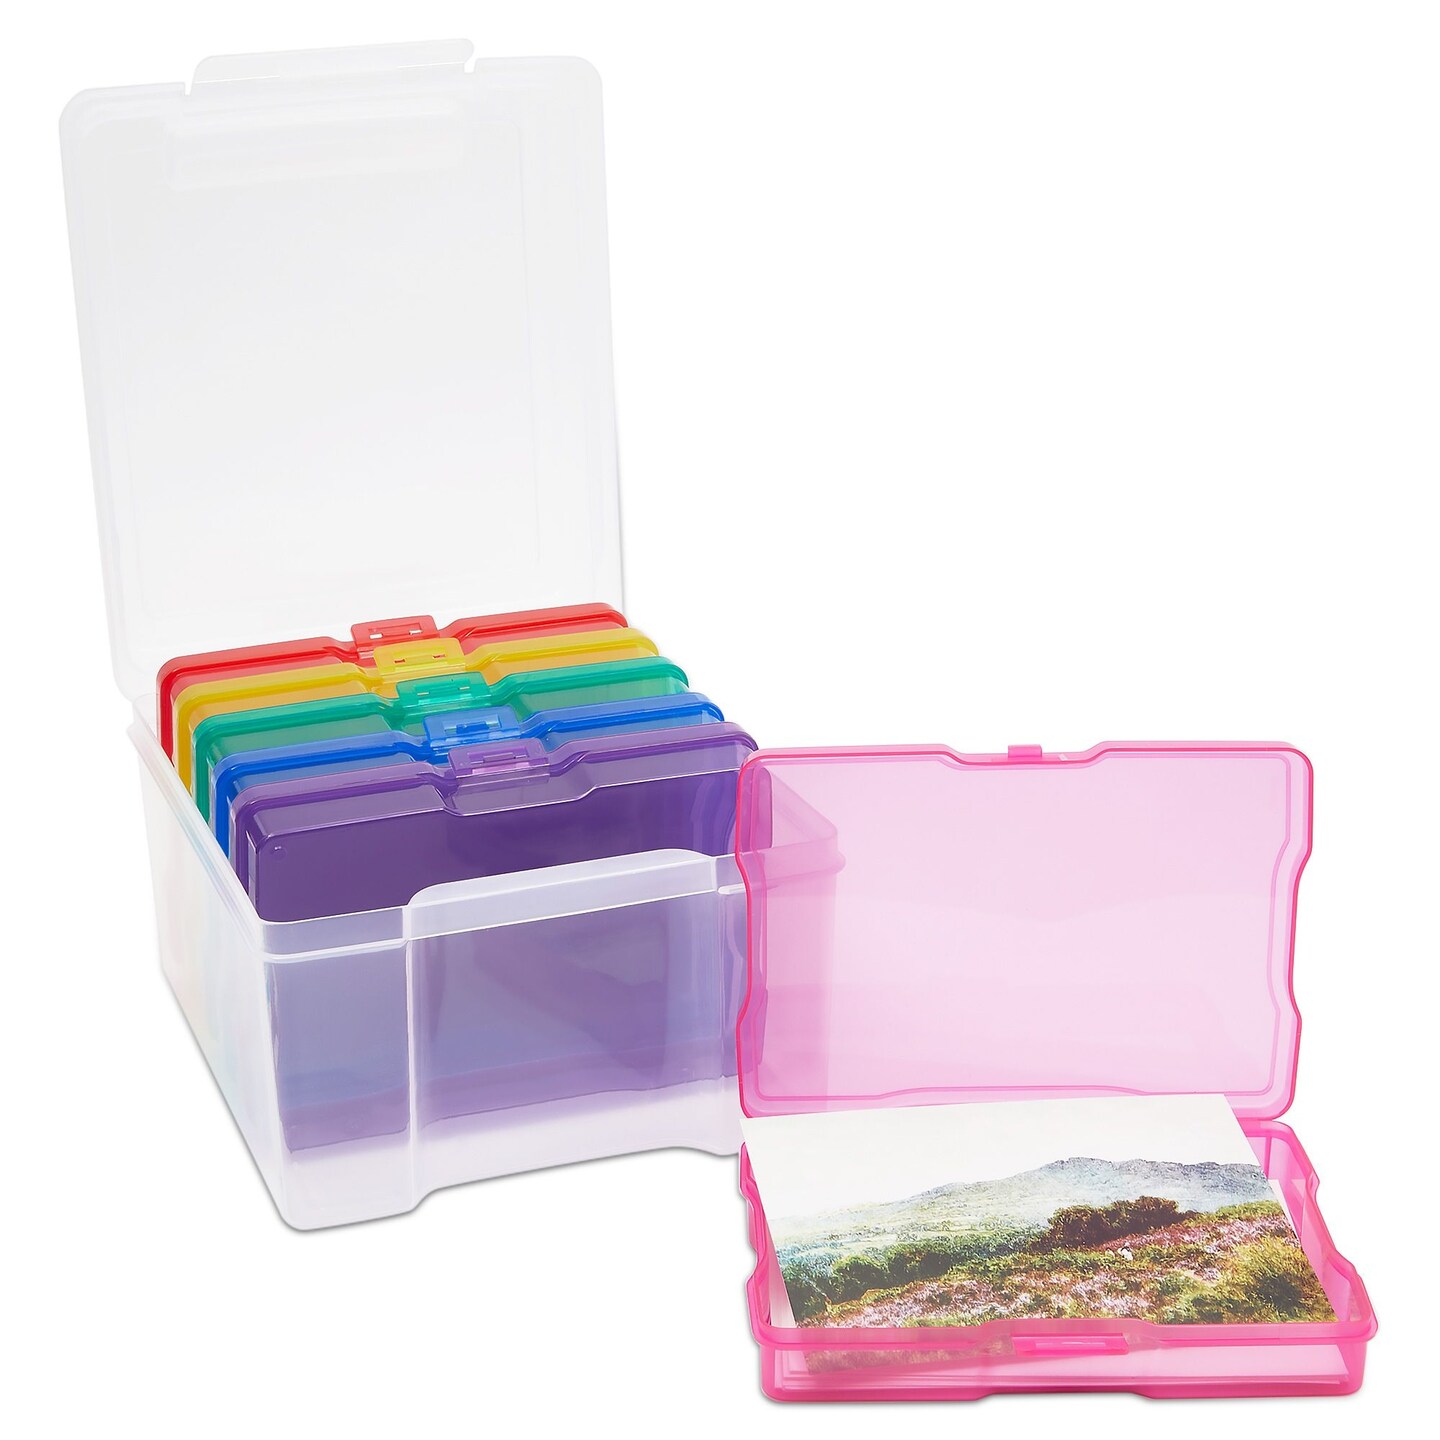 6 Pack: 5”; x 7”; Photo Storage Keeper by Simply Tidy